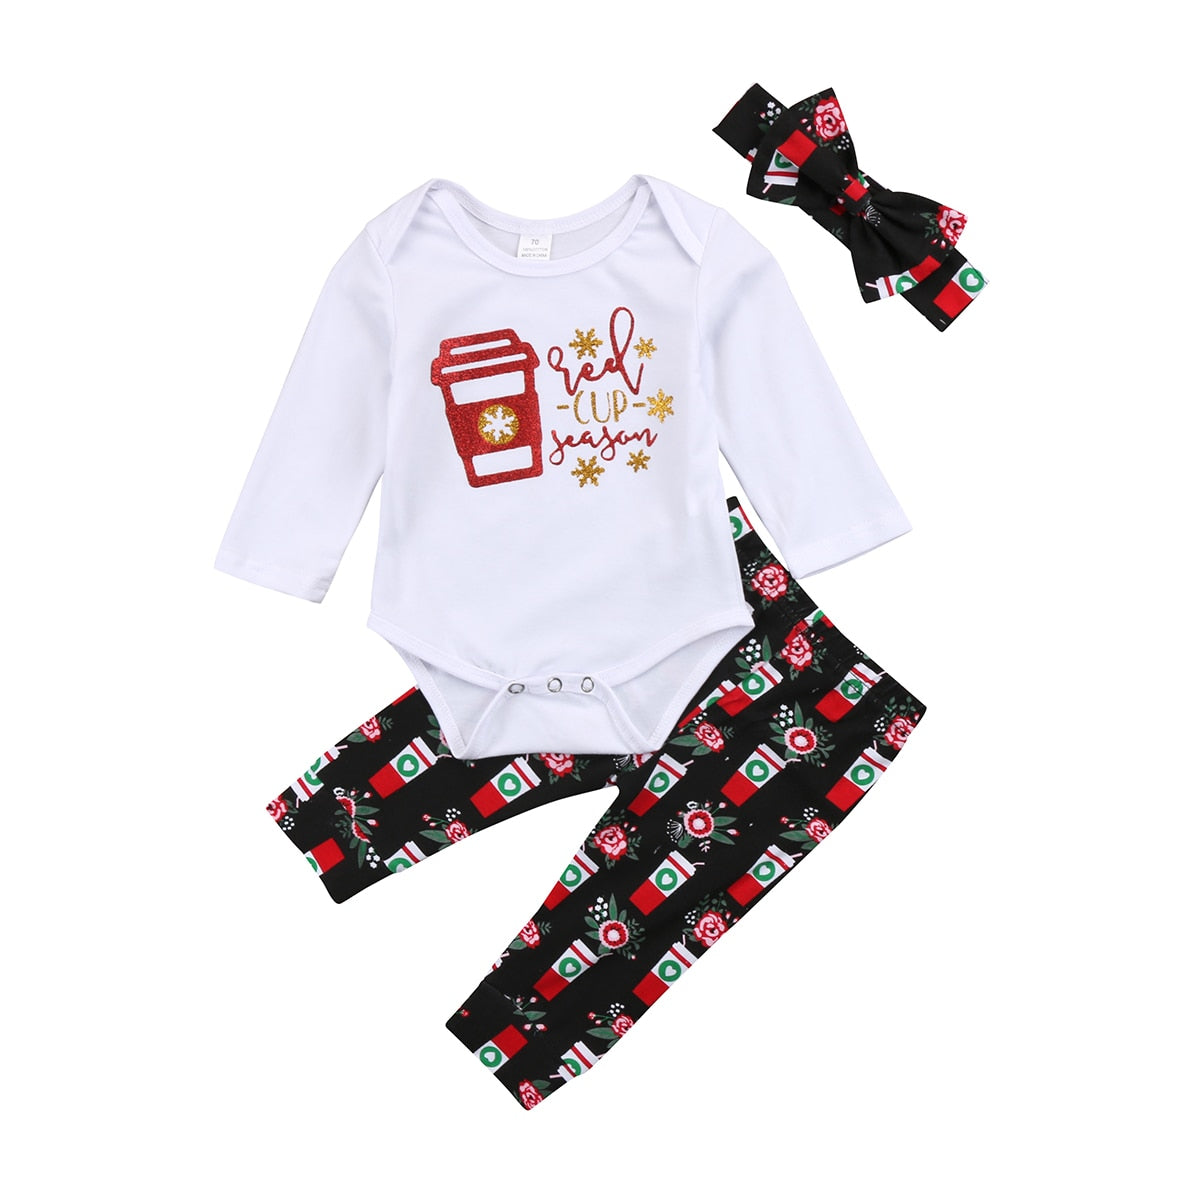 Red Cup Season Holiday Outfit - PREORDER